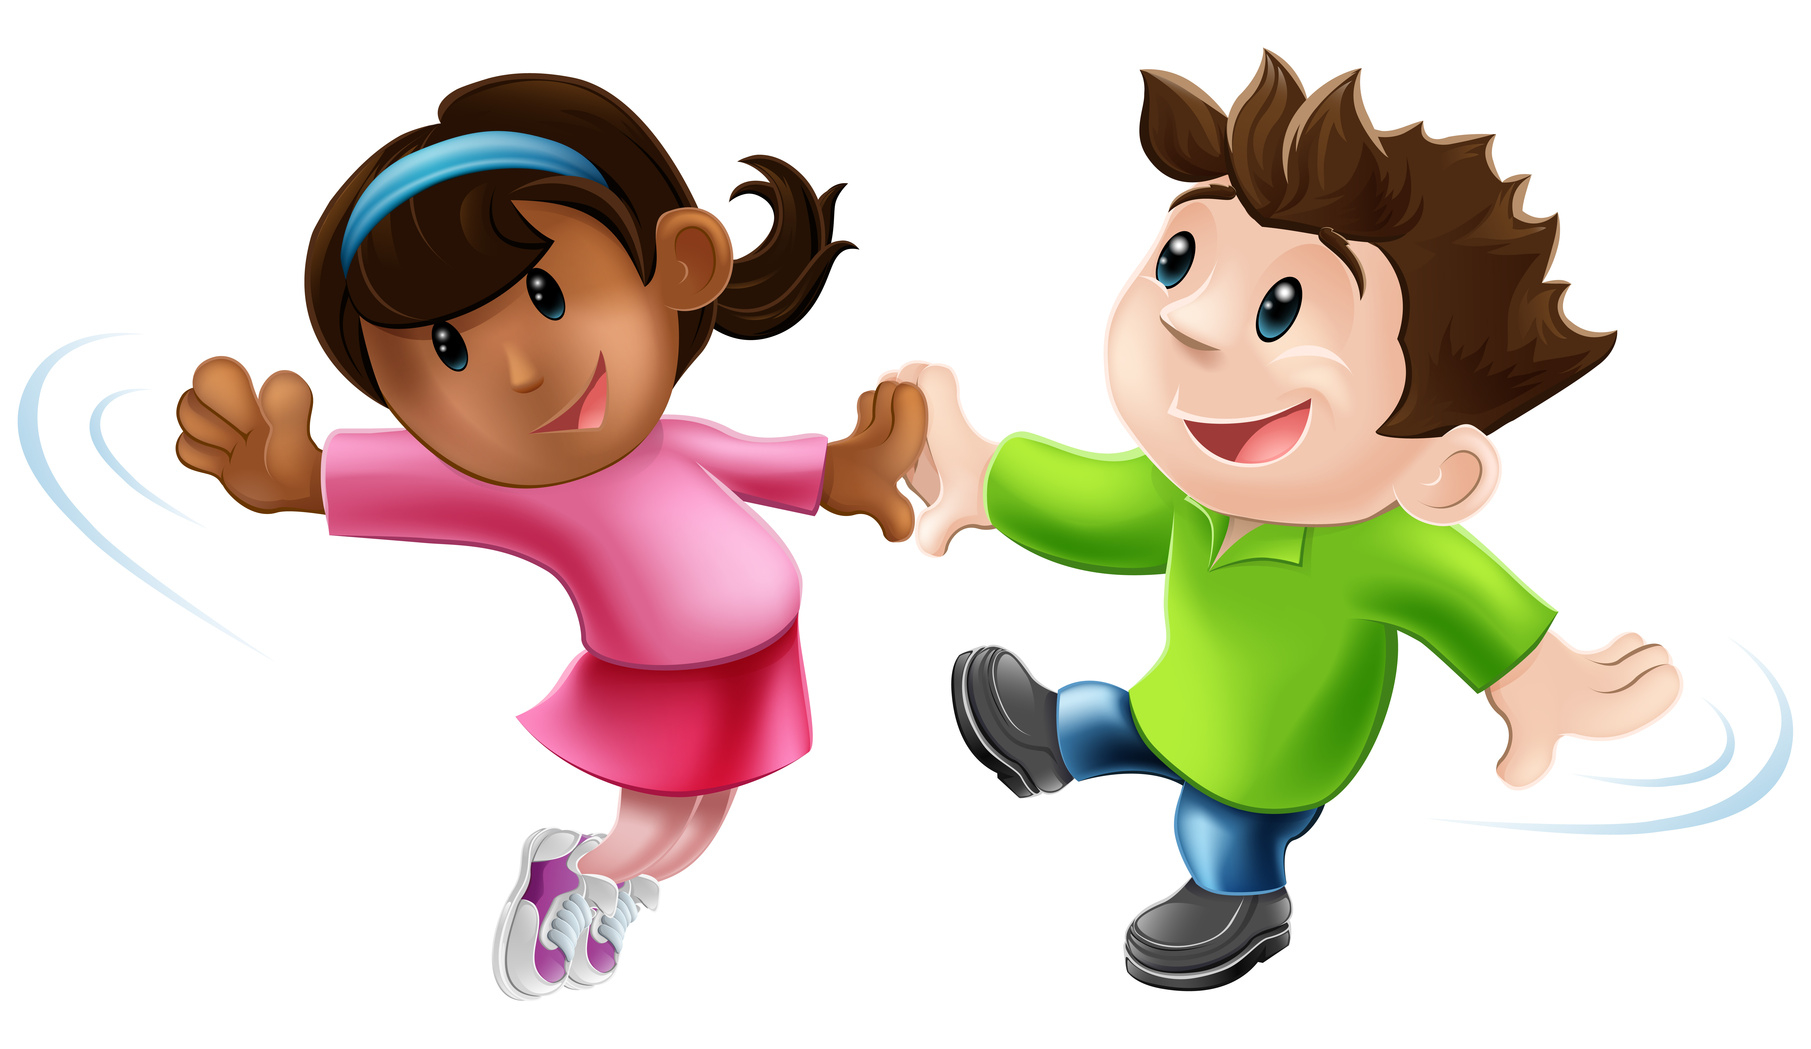 Free Dance Cartoon Images, Download Free Dance Cartoon Images png